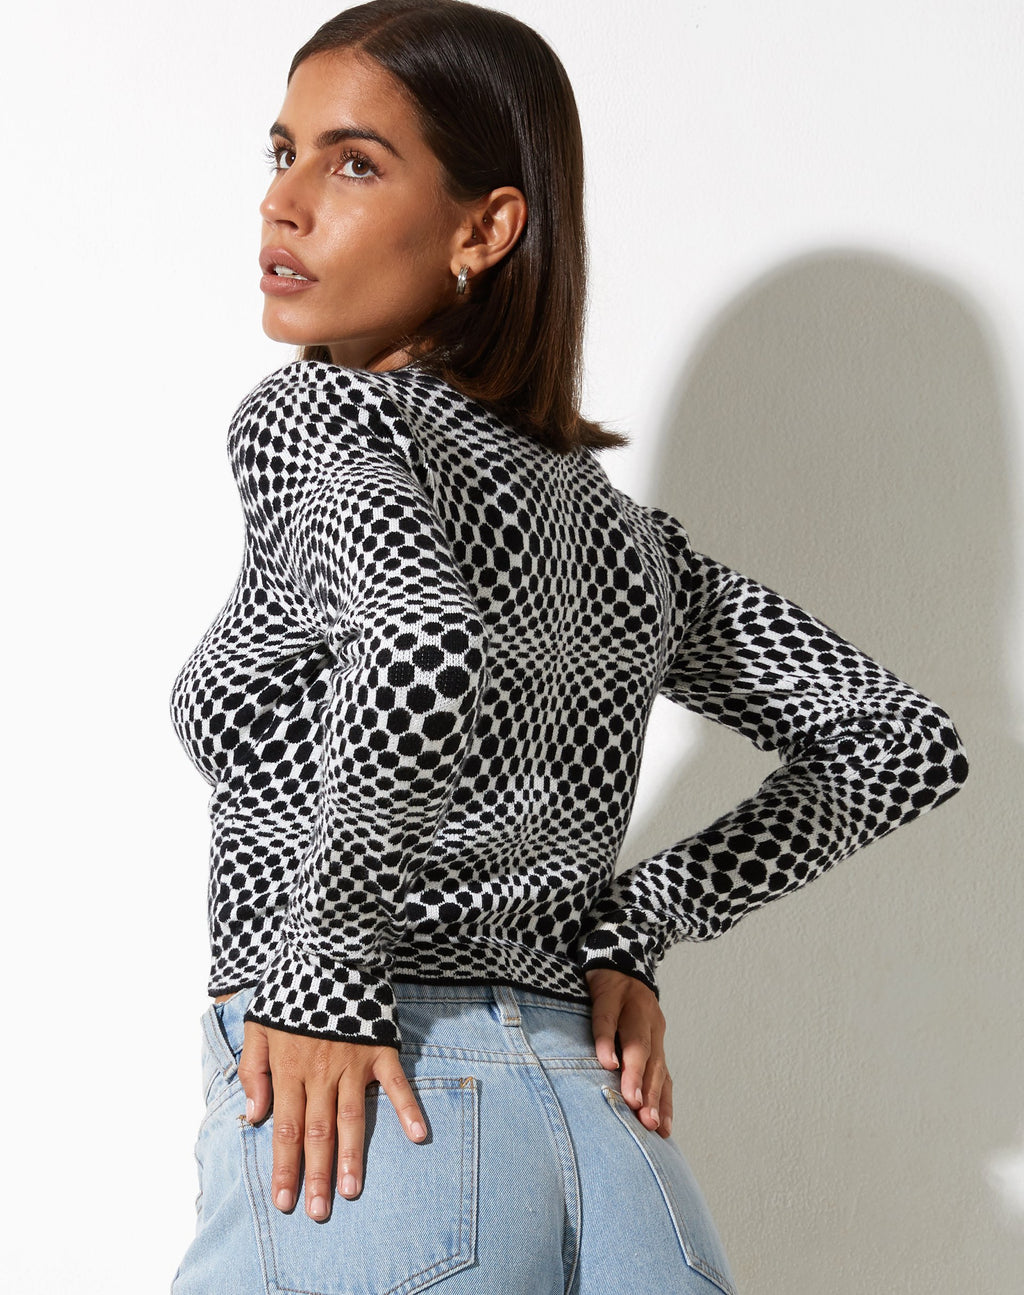 Laria Long Sleeve Top in Optic Monochrome Square Black and White